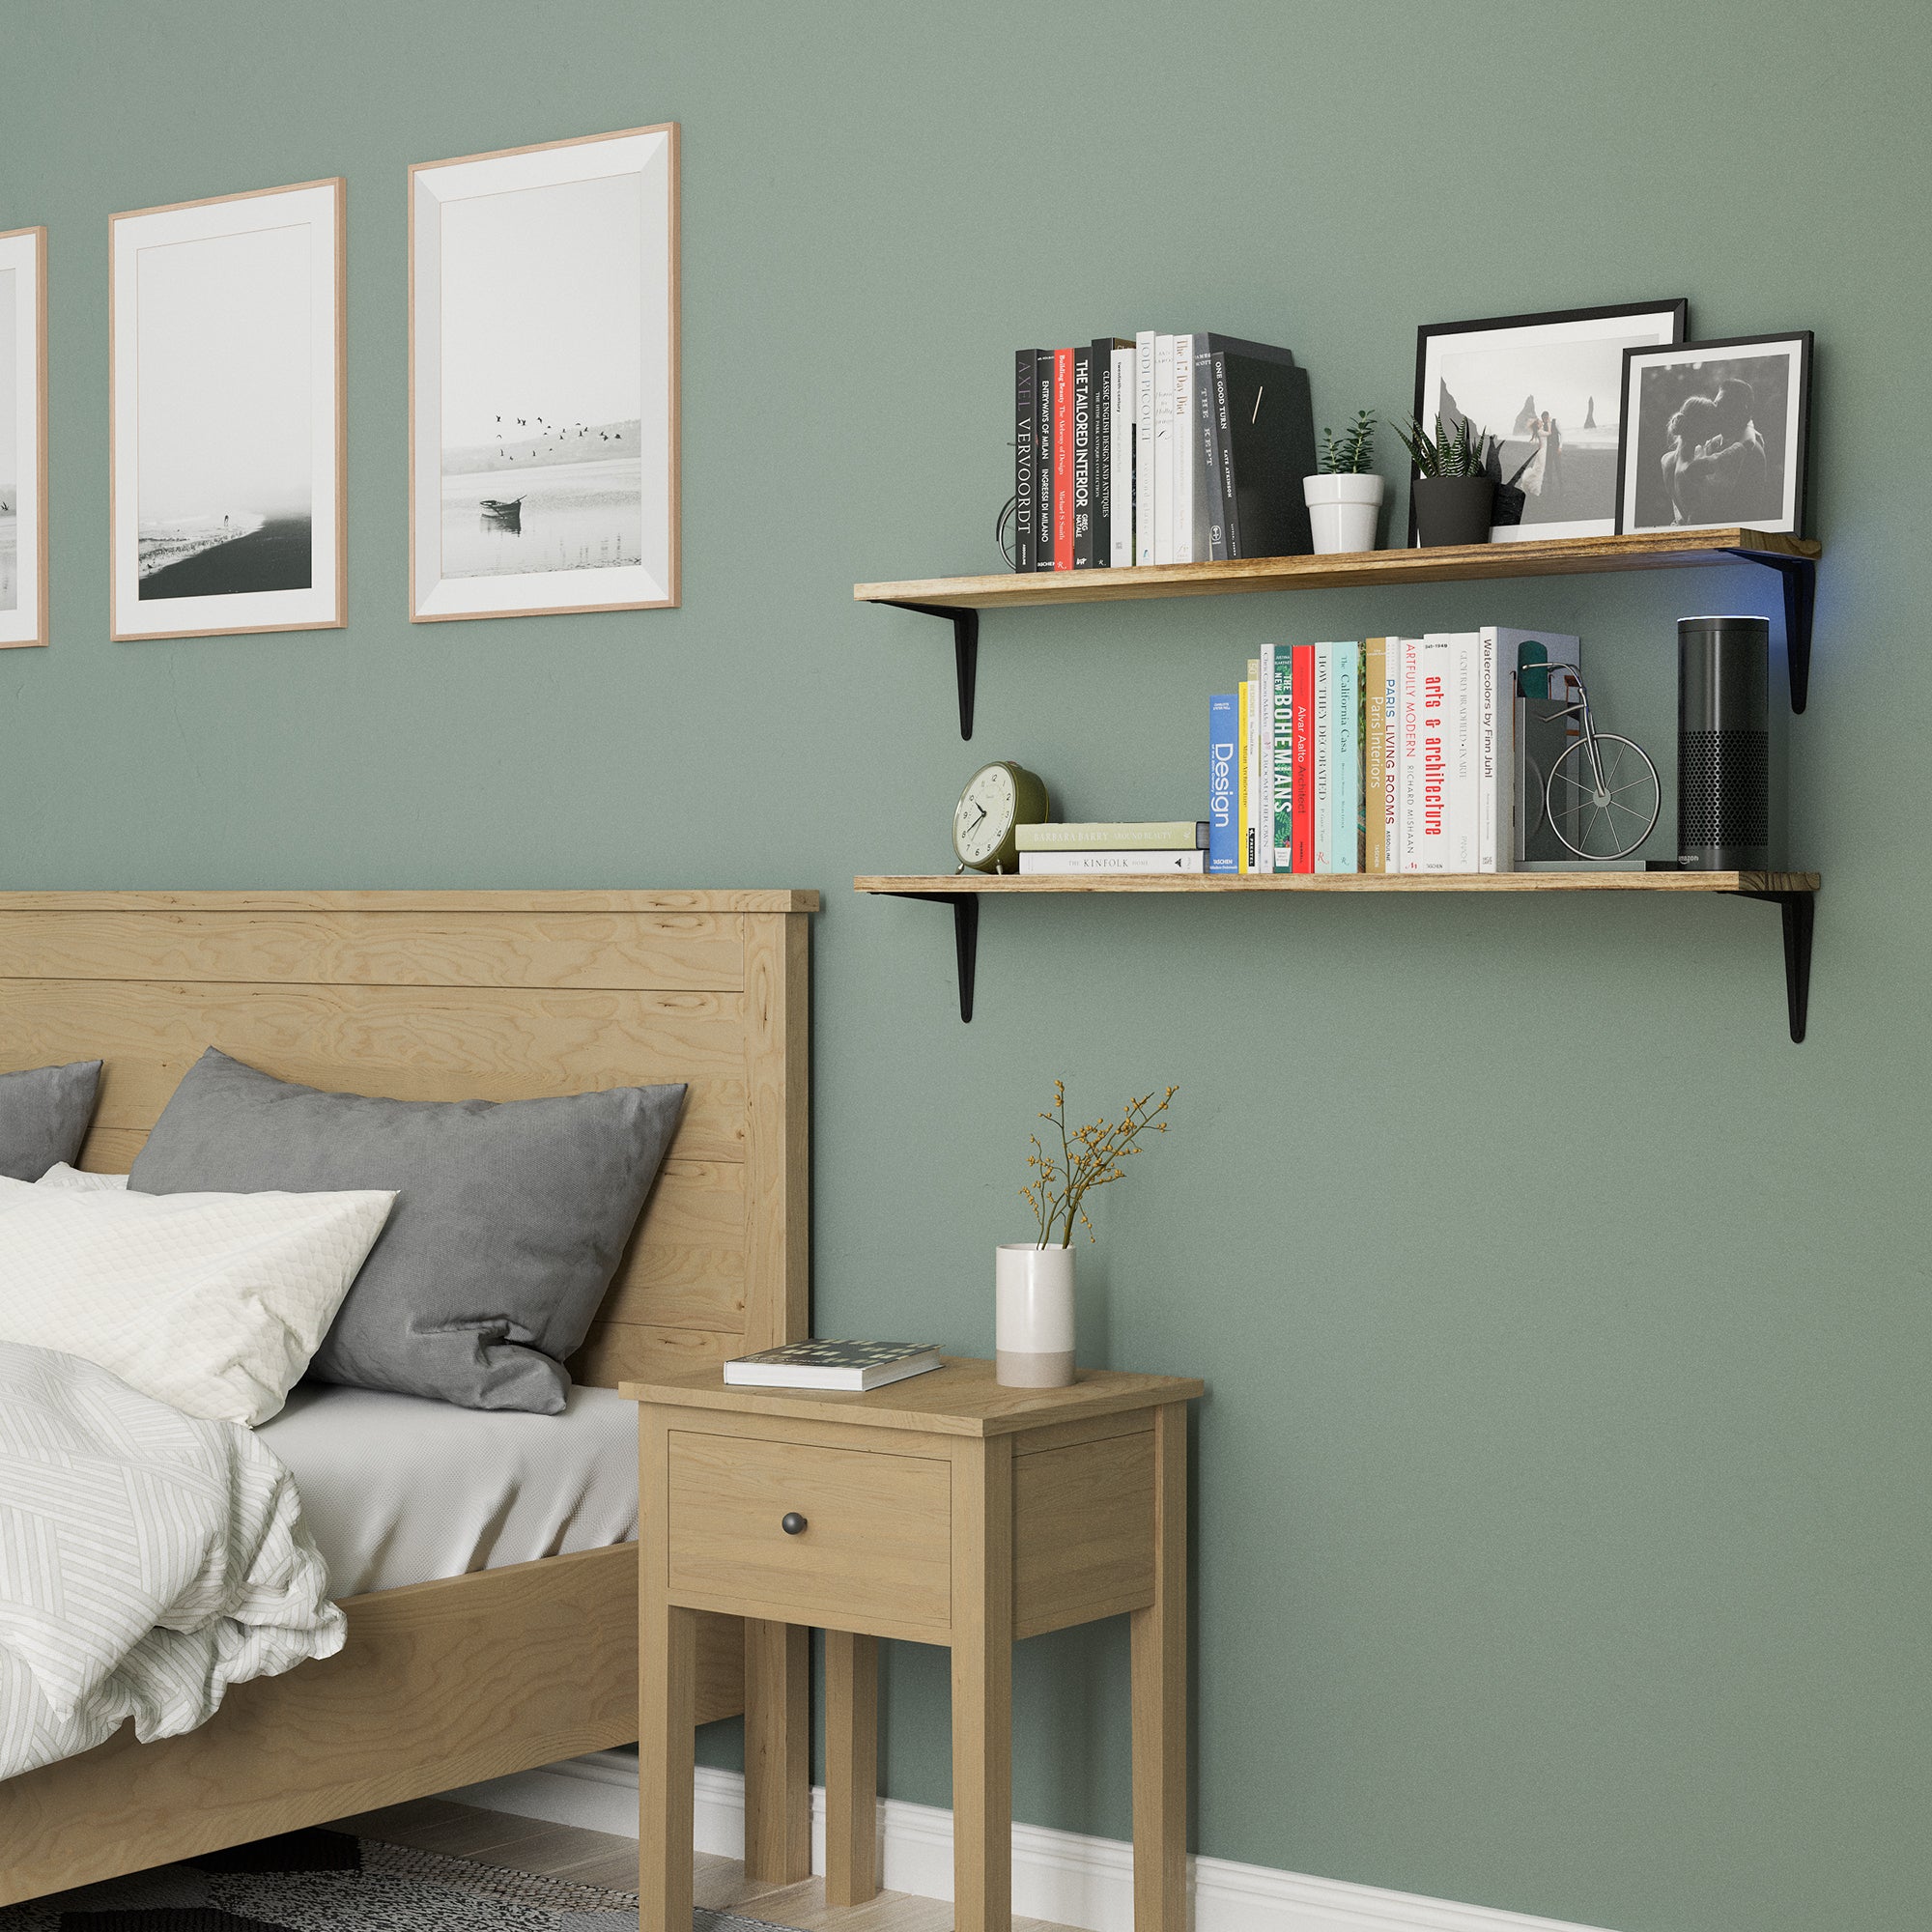 Two rustic bedroom shelves in a bedroom filled with books, pictures, and decor items against a green wall.